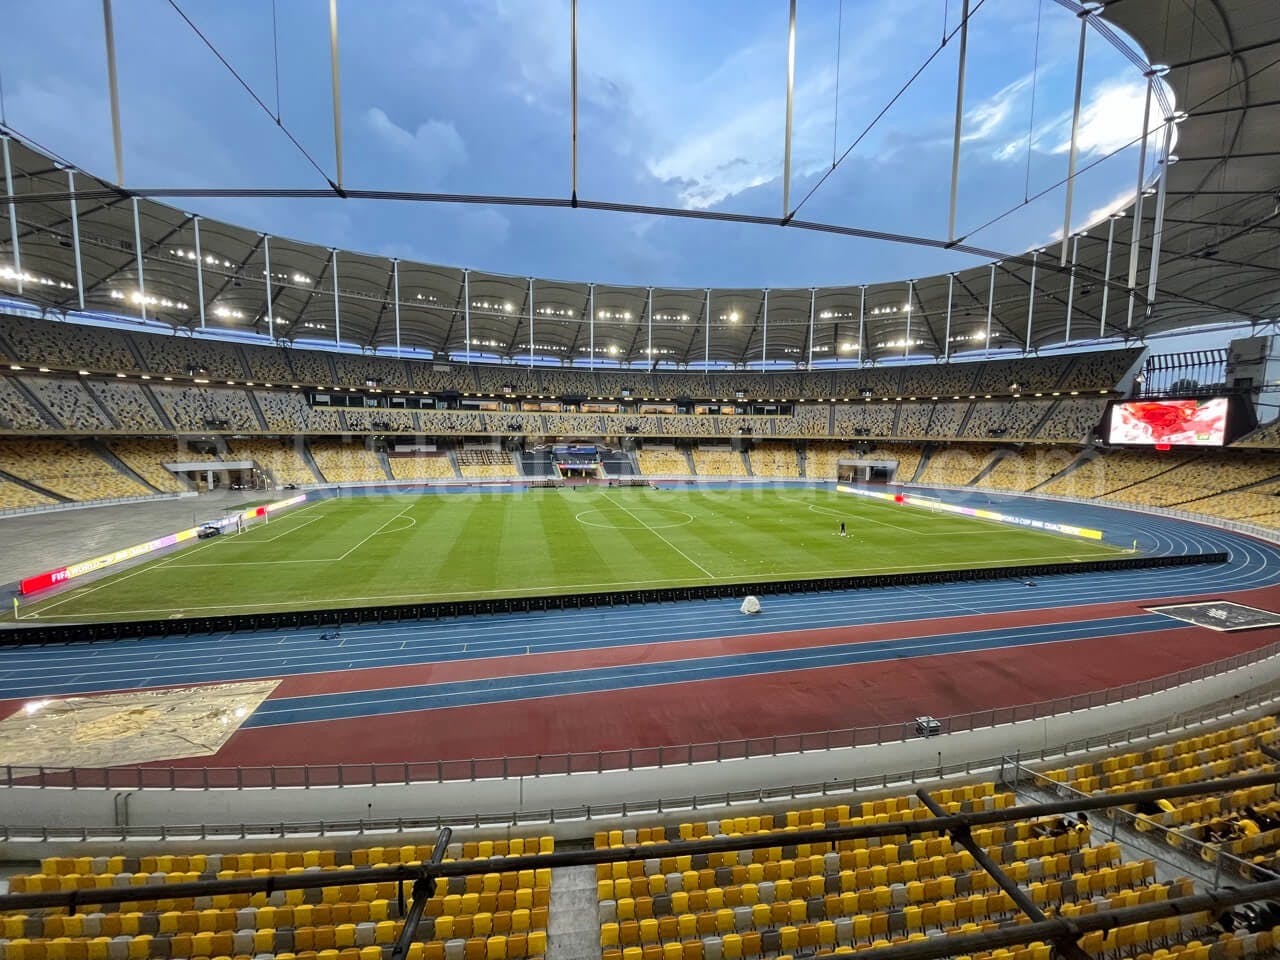 0.5x View of Bukit Jalil field from section 213 of Stadium Bukit Jalil.